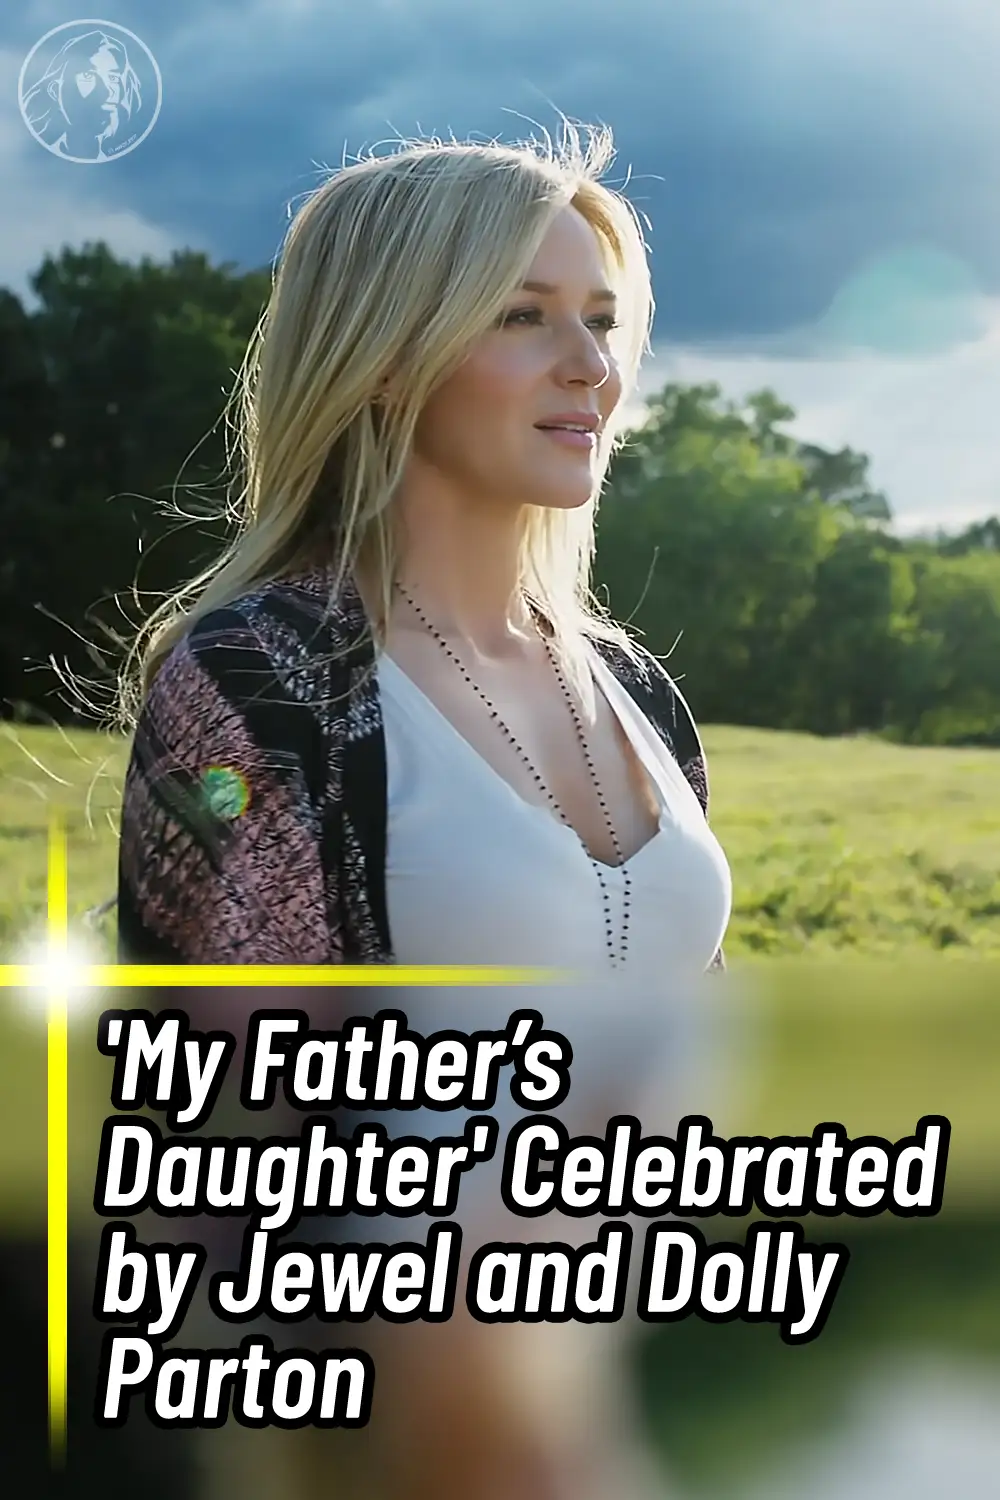 \'My Father’s Daughter\' Celebrated by Jewel and Dolly Parton